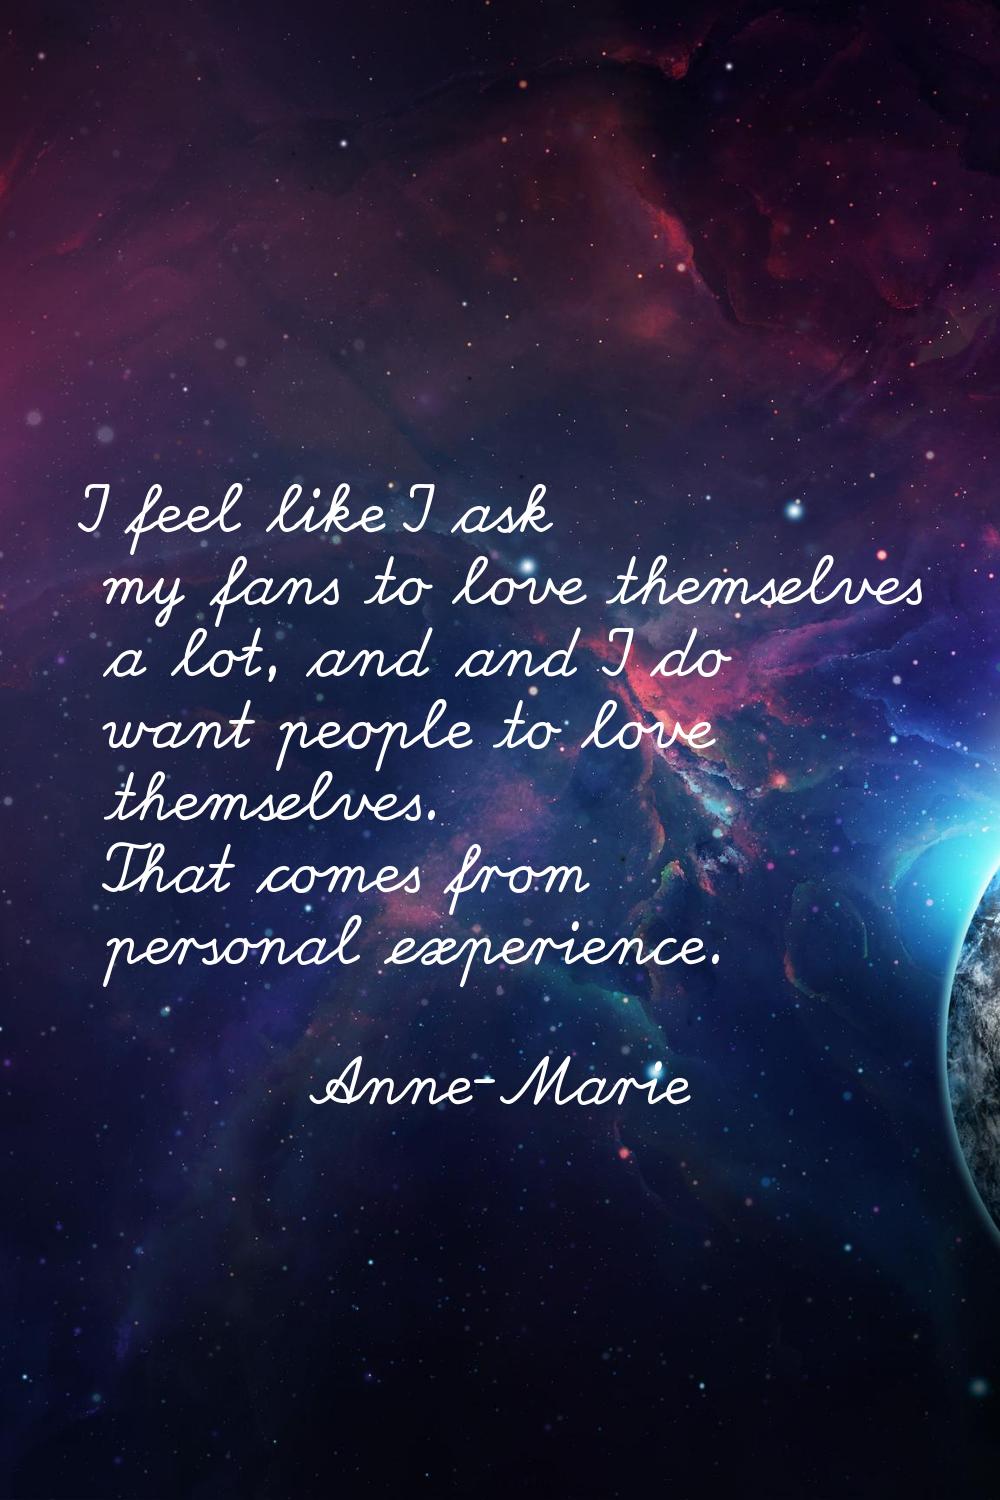 I feel like I ask my fans to love themselves a lot, and and I do want people to love themselves. Th